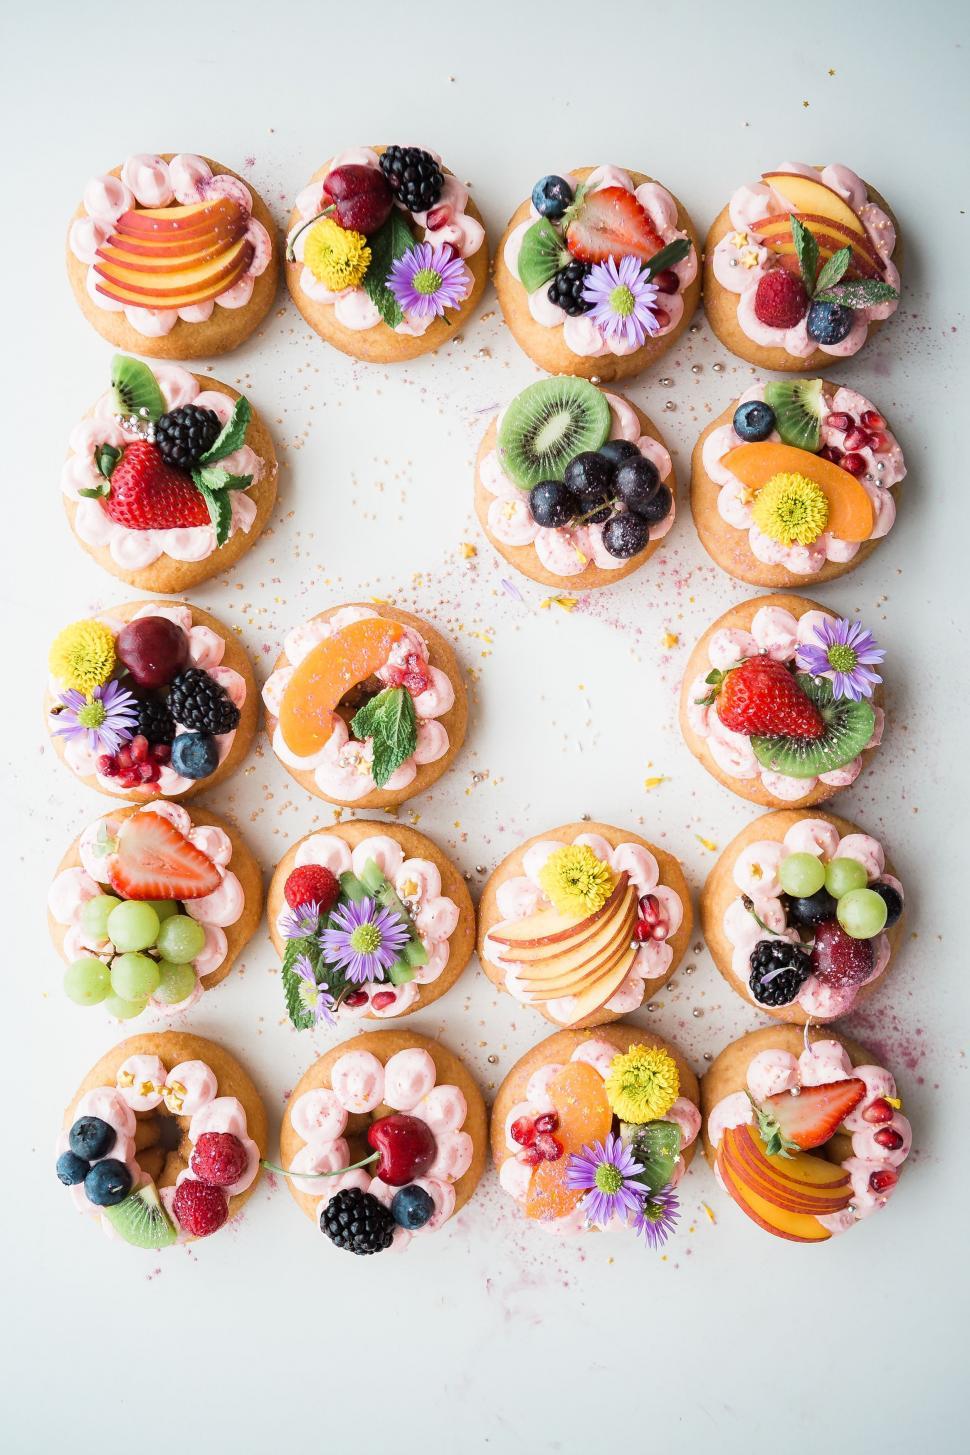 Free Image of Plate of Cupcakes Topped With Fruit 